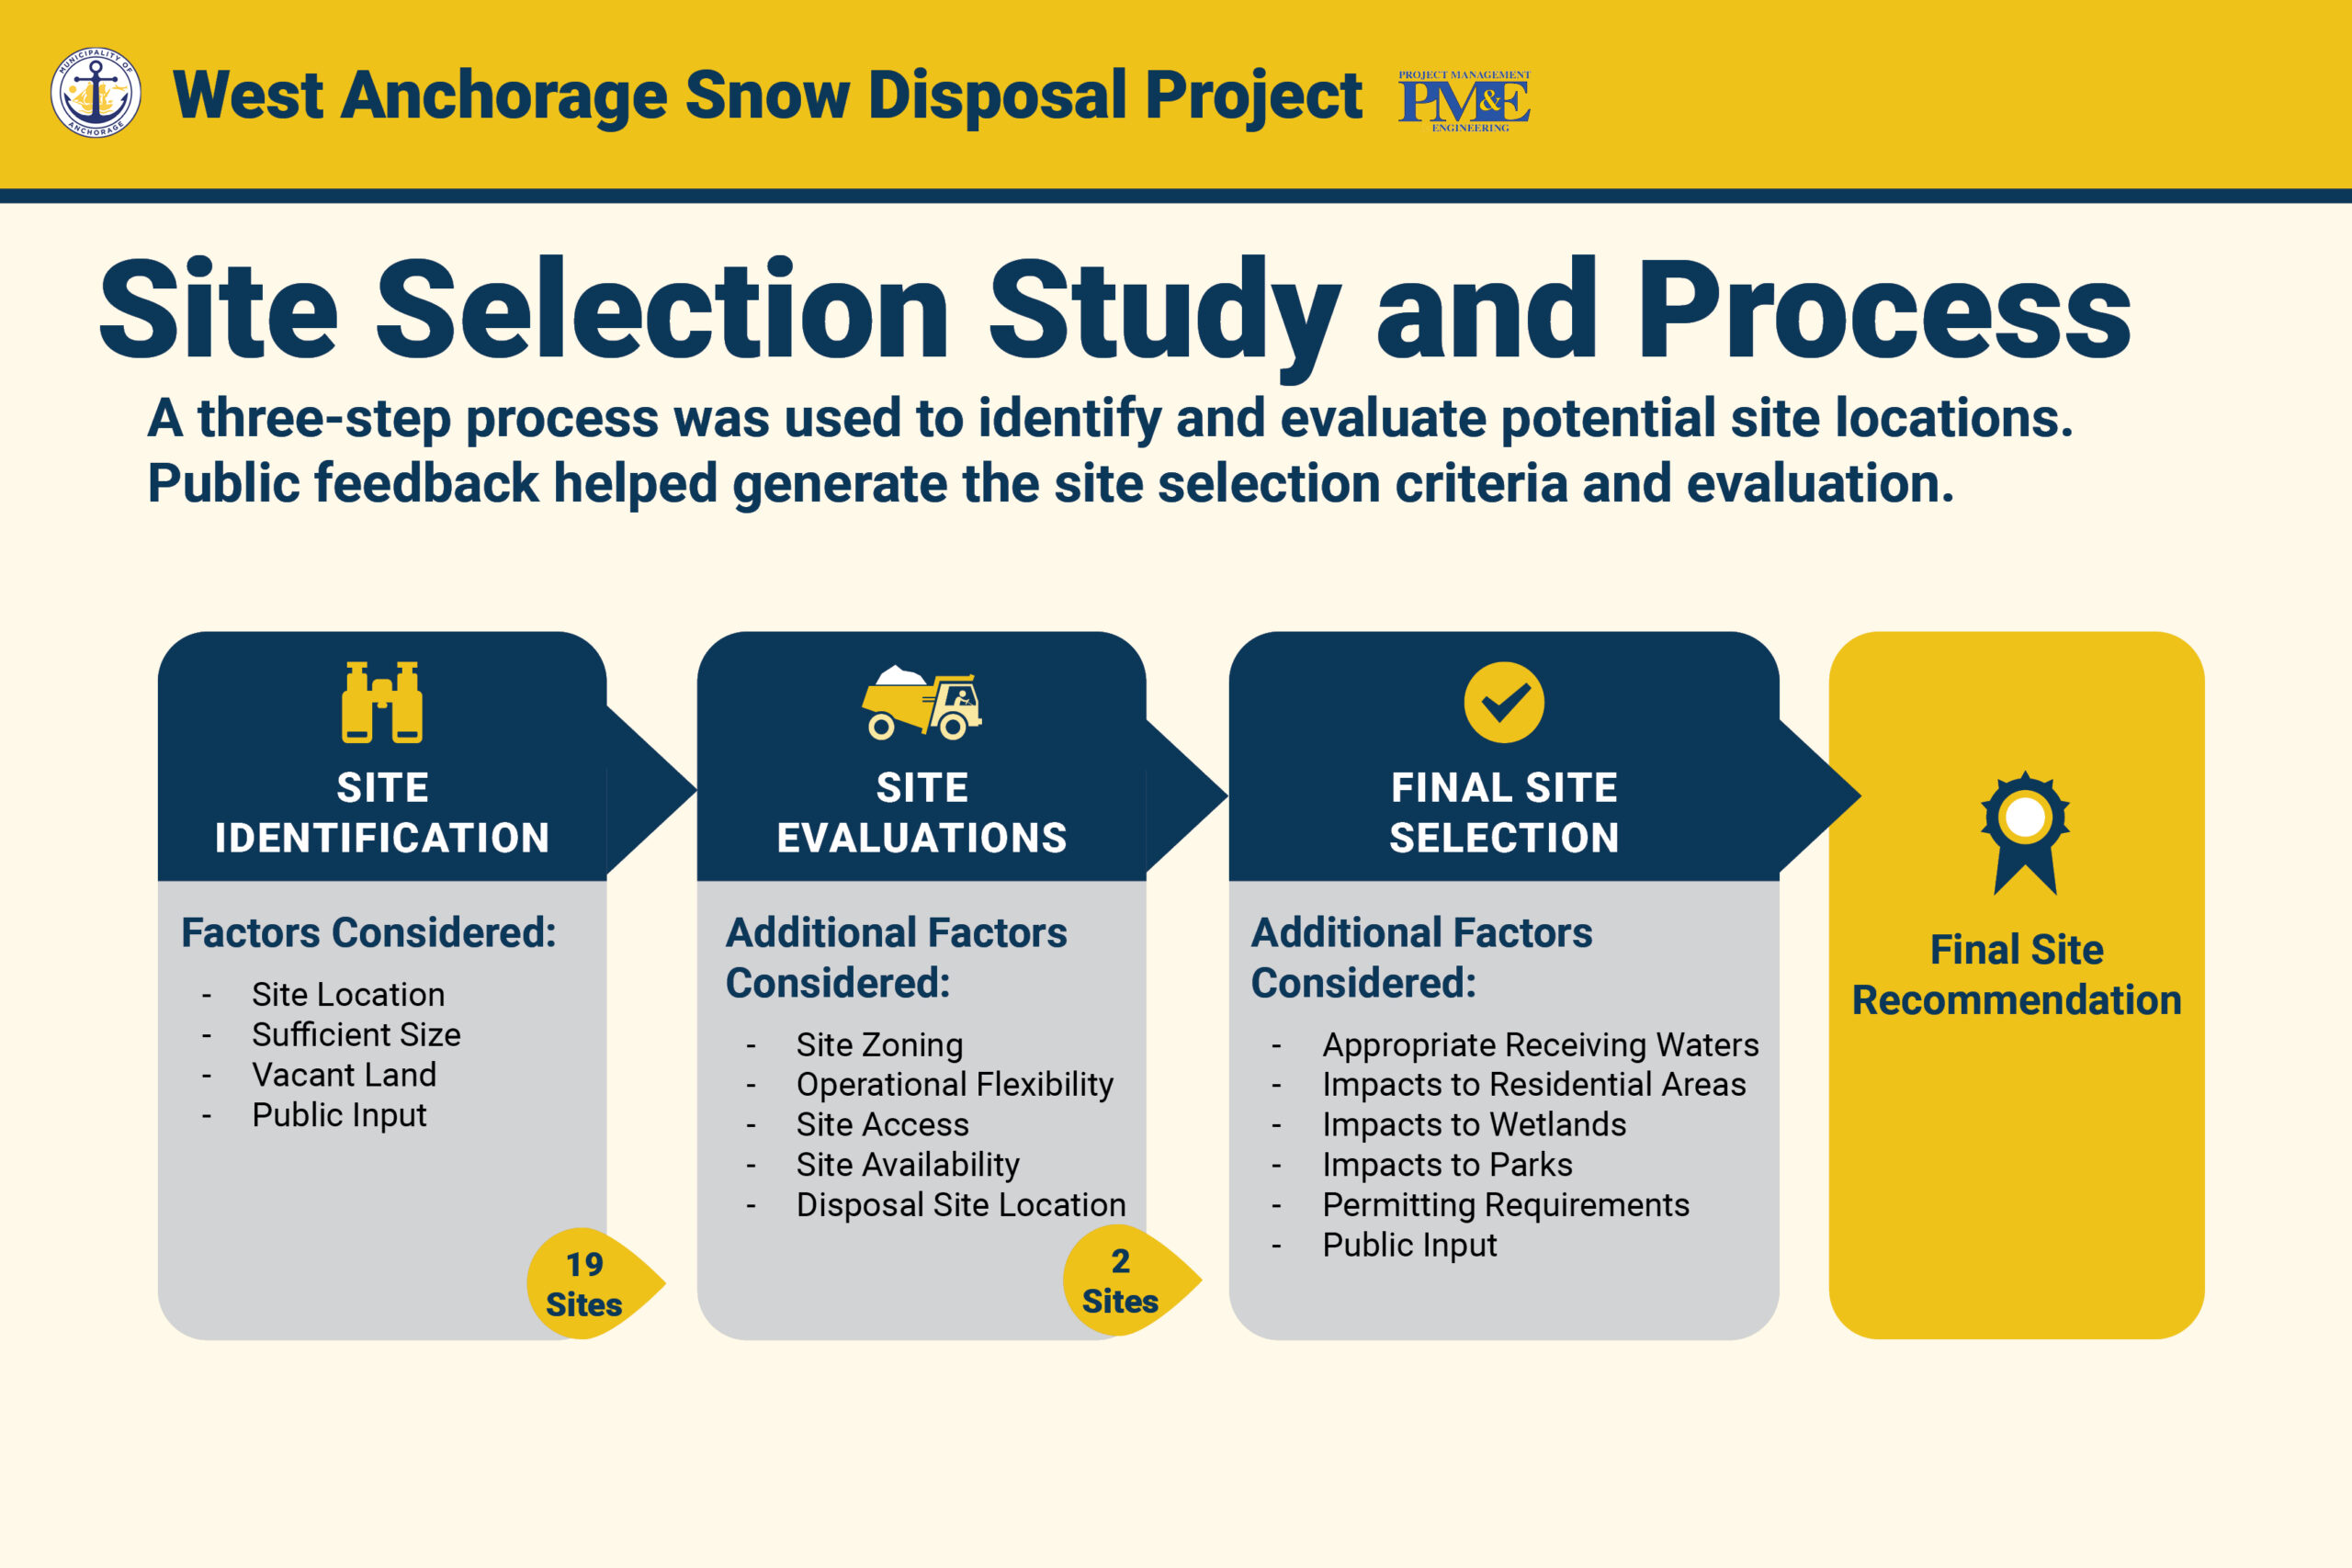 3. SITE SELECTION STUDY AND PROCESS